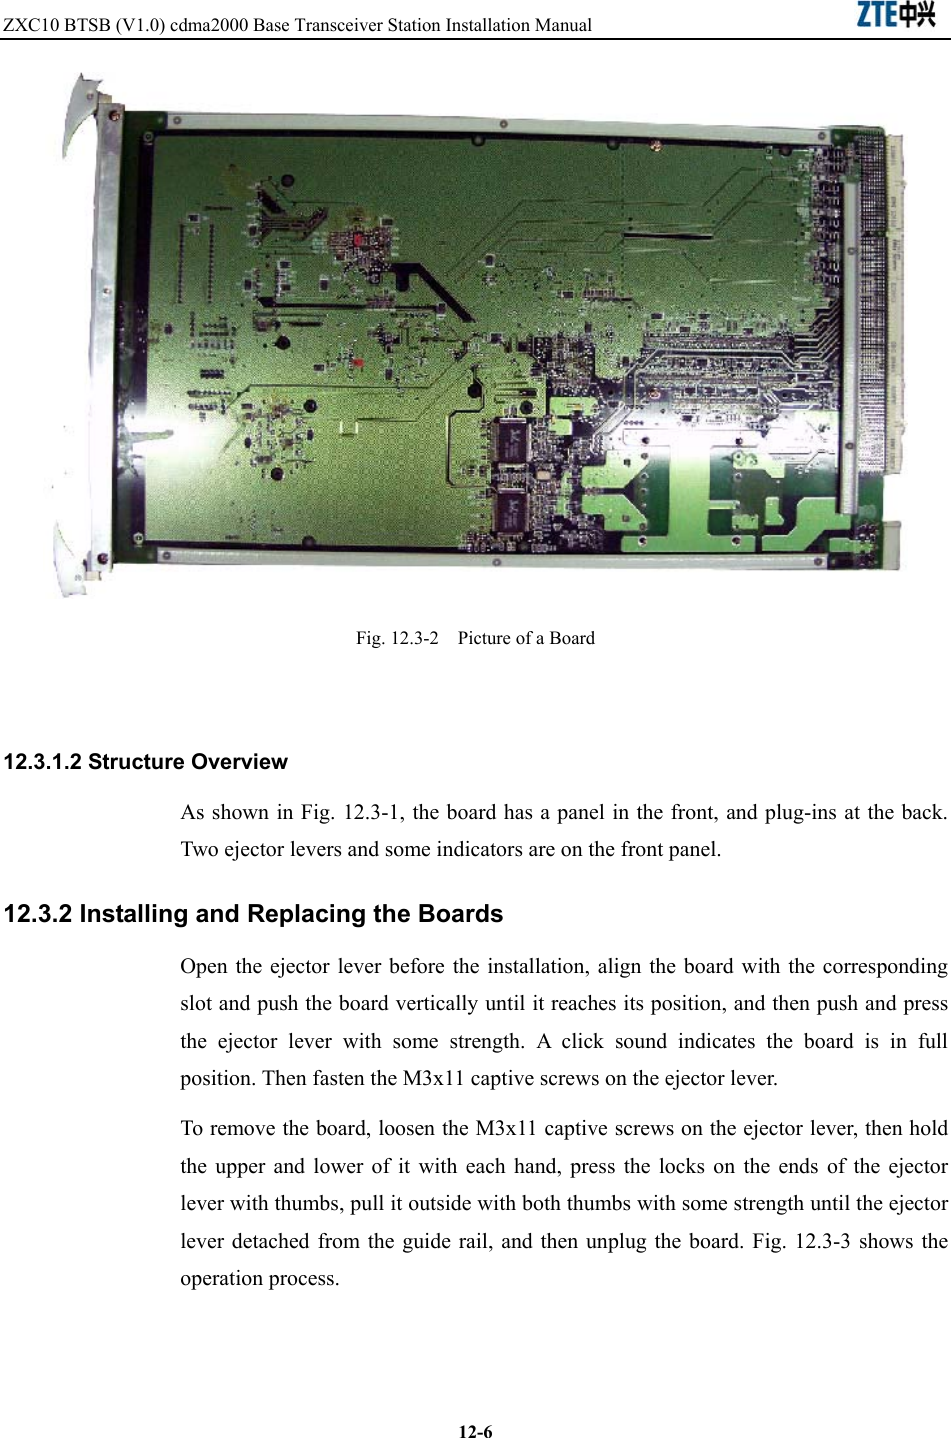 ZXC10 BTSB (V1.0) cdma2000 Base Transceiver Station Installation Manual                               12-6 Fig. 12.3-2    Picture of a Board    12.3.1.2 Structure Overview As shown in Fig. 12.3-1, the board has a panel in the front, and plug-ins at the back. Two ejector levers and some indicators are on the front panel.   12.3.2 Installing and Replacing the Boards Open the ejector lever before the installation, align the board with the corresponding slot and push the board vertically until it reaches its position, and then push and press the ejector lever with some strength. A click sound indicates the board is in full position. Then fasten the M3x11 captive screws on the ejector lever.   To remove the board, loosen the M3x11 captive screws on the ejector lever, then hold the upper and lower of it with each hand, press the locks on the ends of the ejector lever with thumbs, pull it outside with both thumbs with some strength until the ejector lever detached from the guide rail, and then unplug the board. Fig. 12.3-3 shows the operation process.   